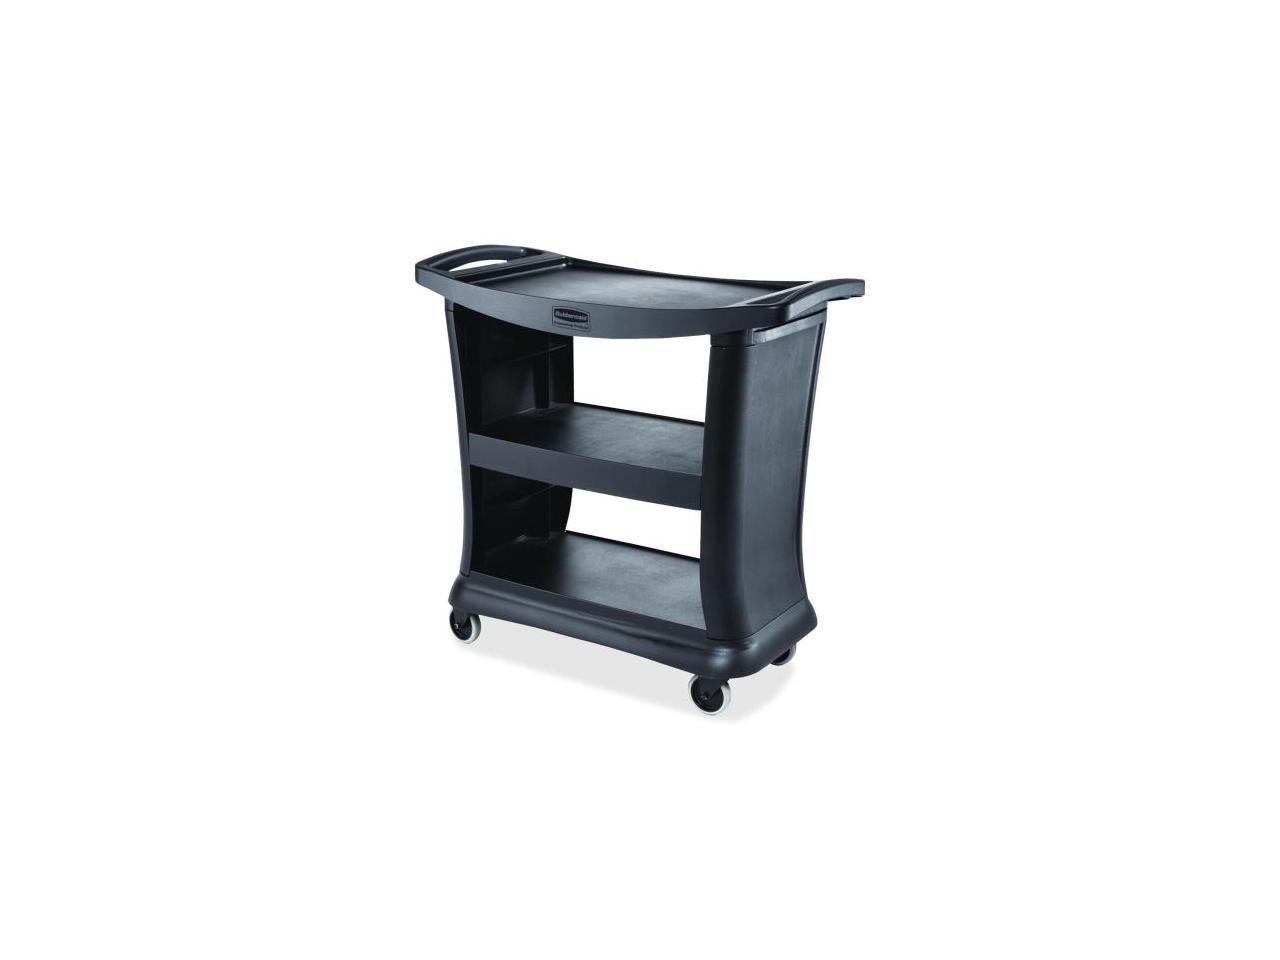 Rubbermaid Commercial Executive Service Cart, Three-Shelf, 20.33w x 38.9d x 38.9 h, Black -RCP9T6800BK - image 5 of 5